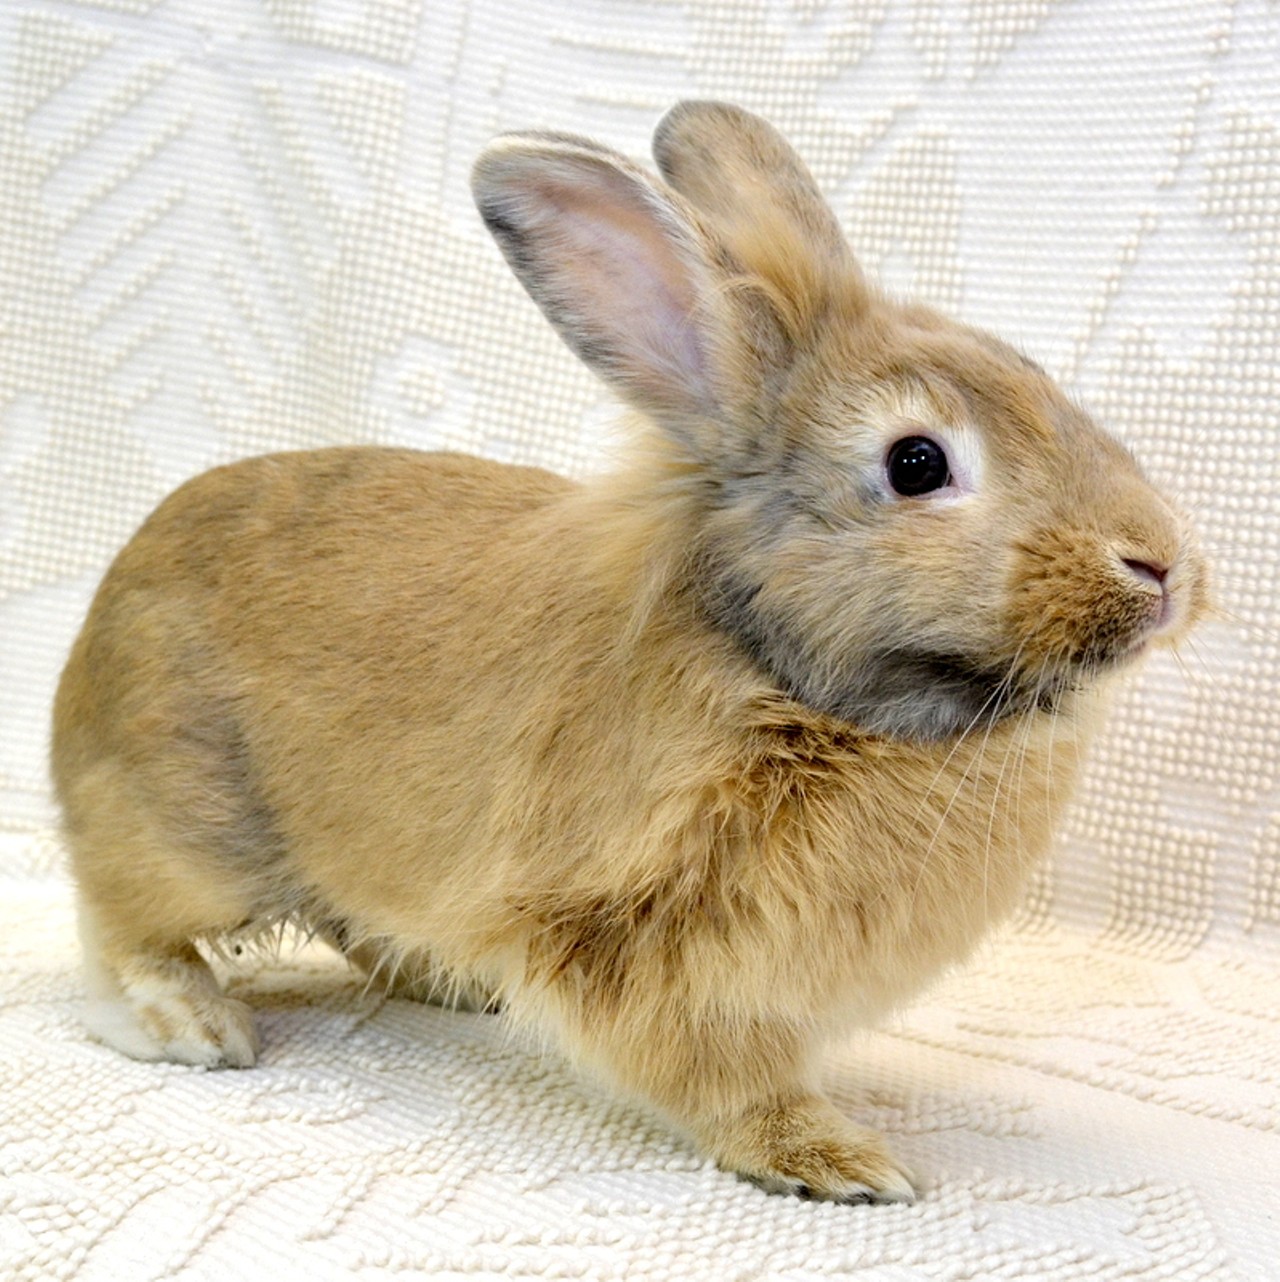 NAME: Roger
GENDER: Male
BREED: Lionhead
AGE: 1 year
WEIGHT: 4 pounds
SPECIAL CONSIDERATIONS: None
REASON I CAME TO MHS: Owner surrender
LOCATION: Berman Center for Animal Care in Westland
ID NUMBER: 864916